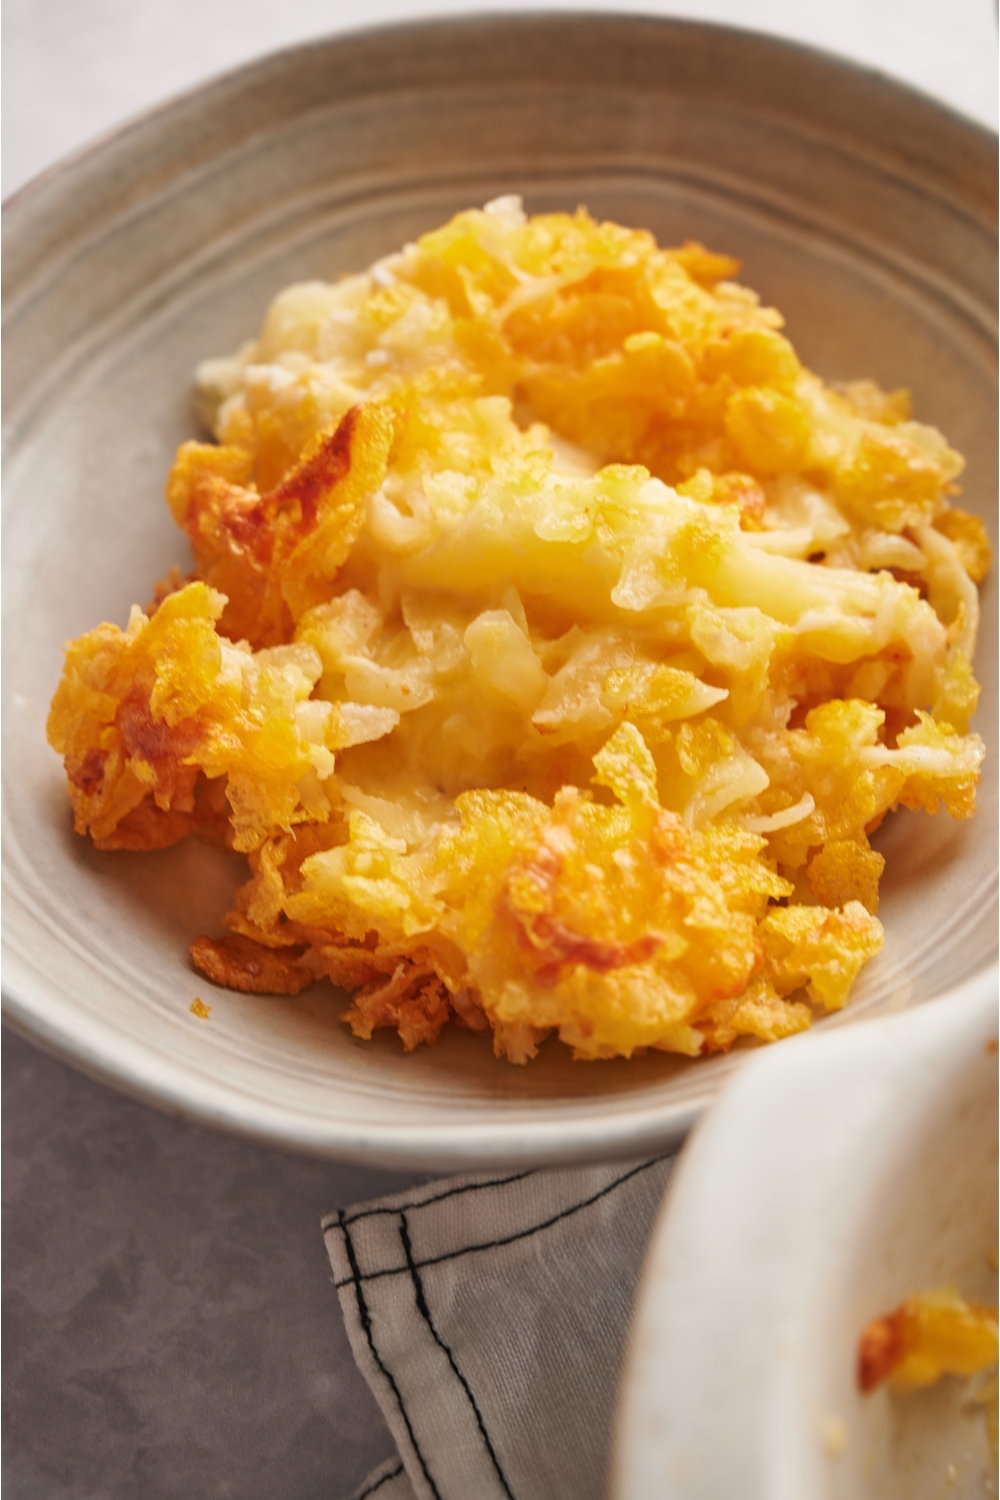 A bowl with a serving of hashbrown casserole in it.